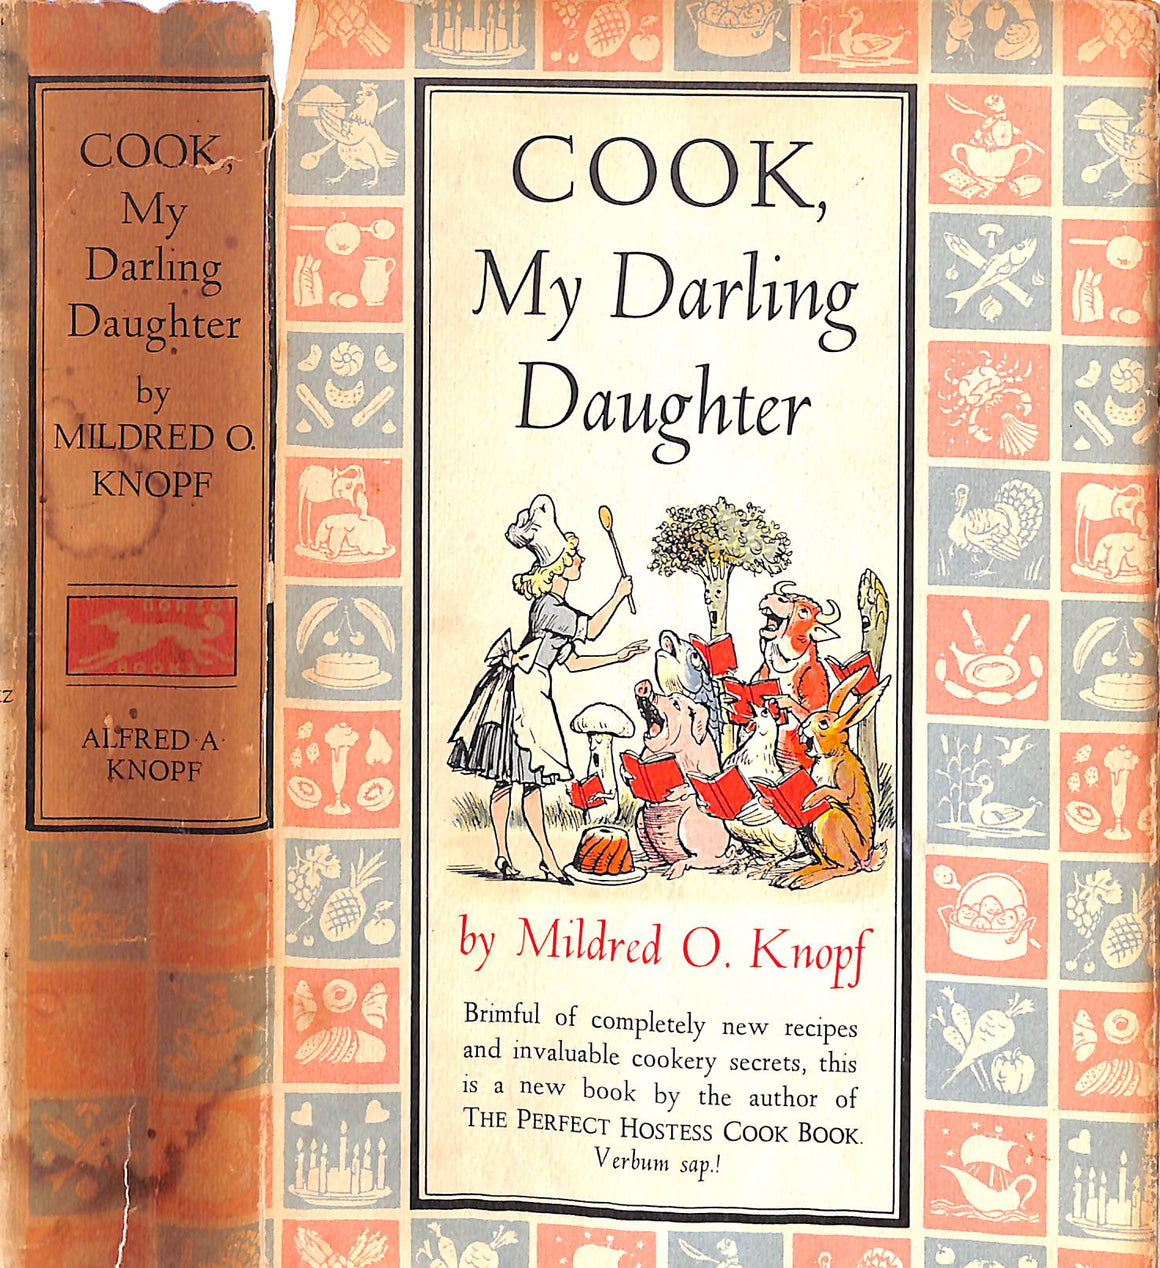 "Cook, My Darling Daughter" 1959 KNOPF, Mildred O.